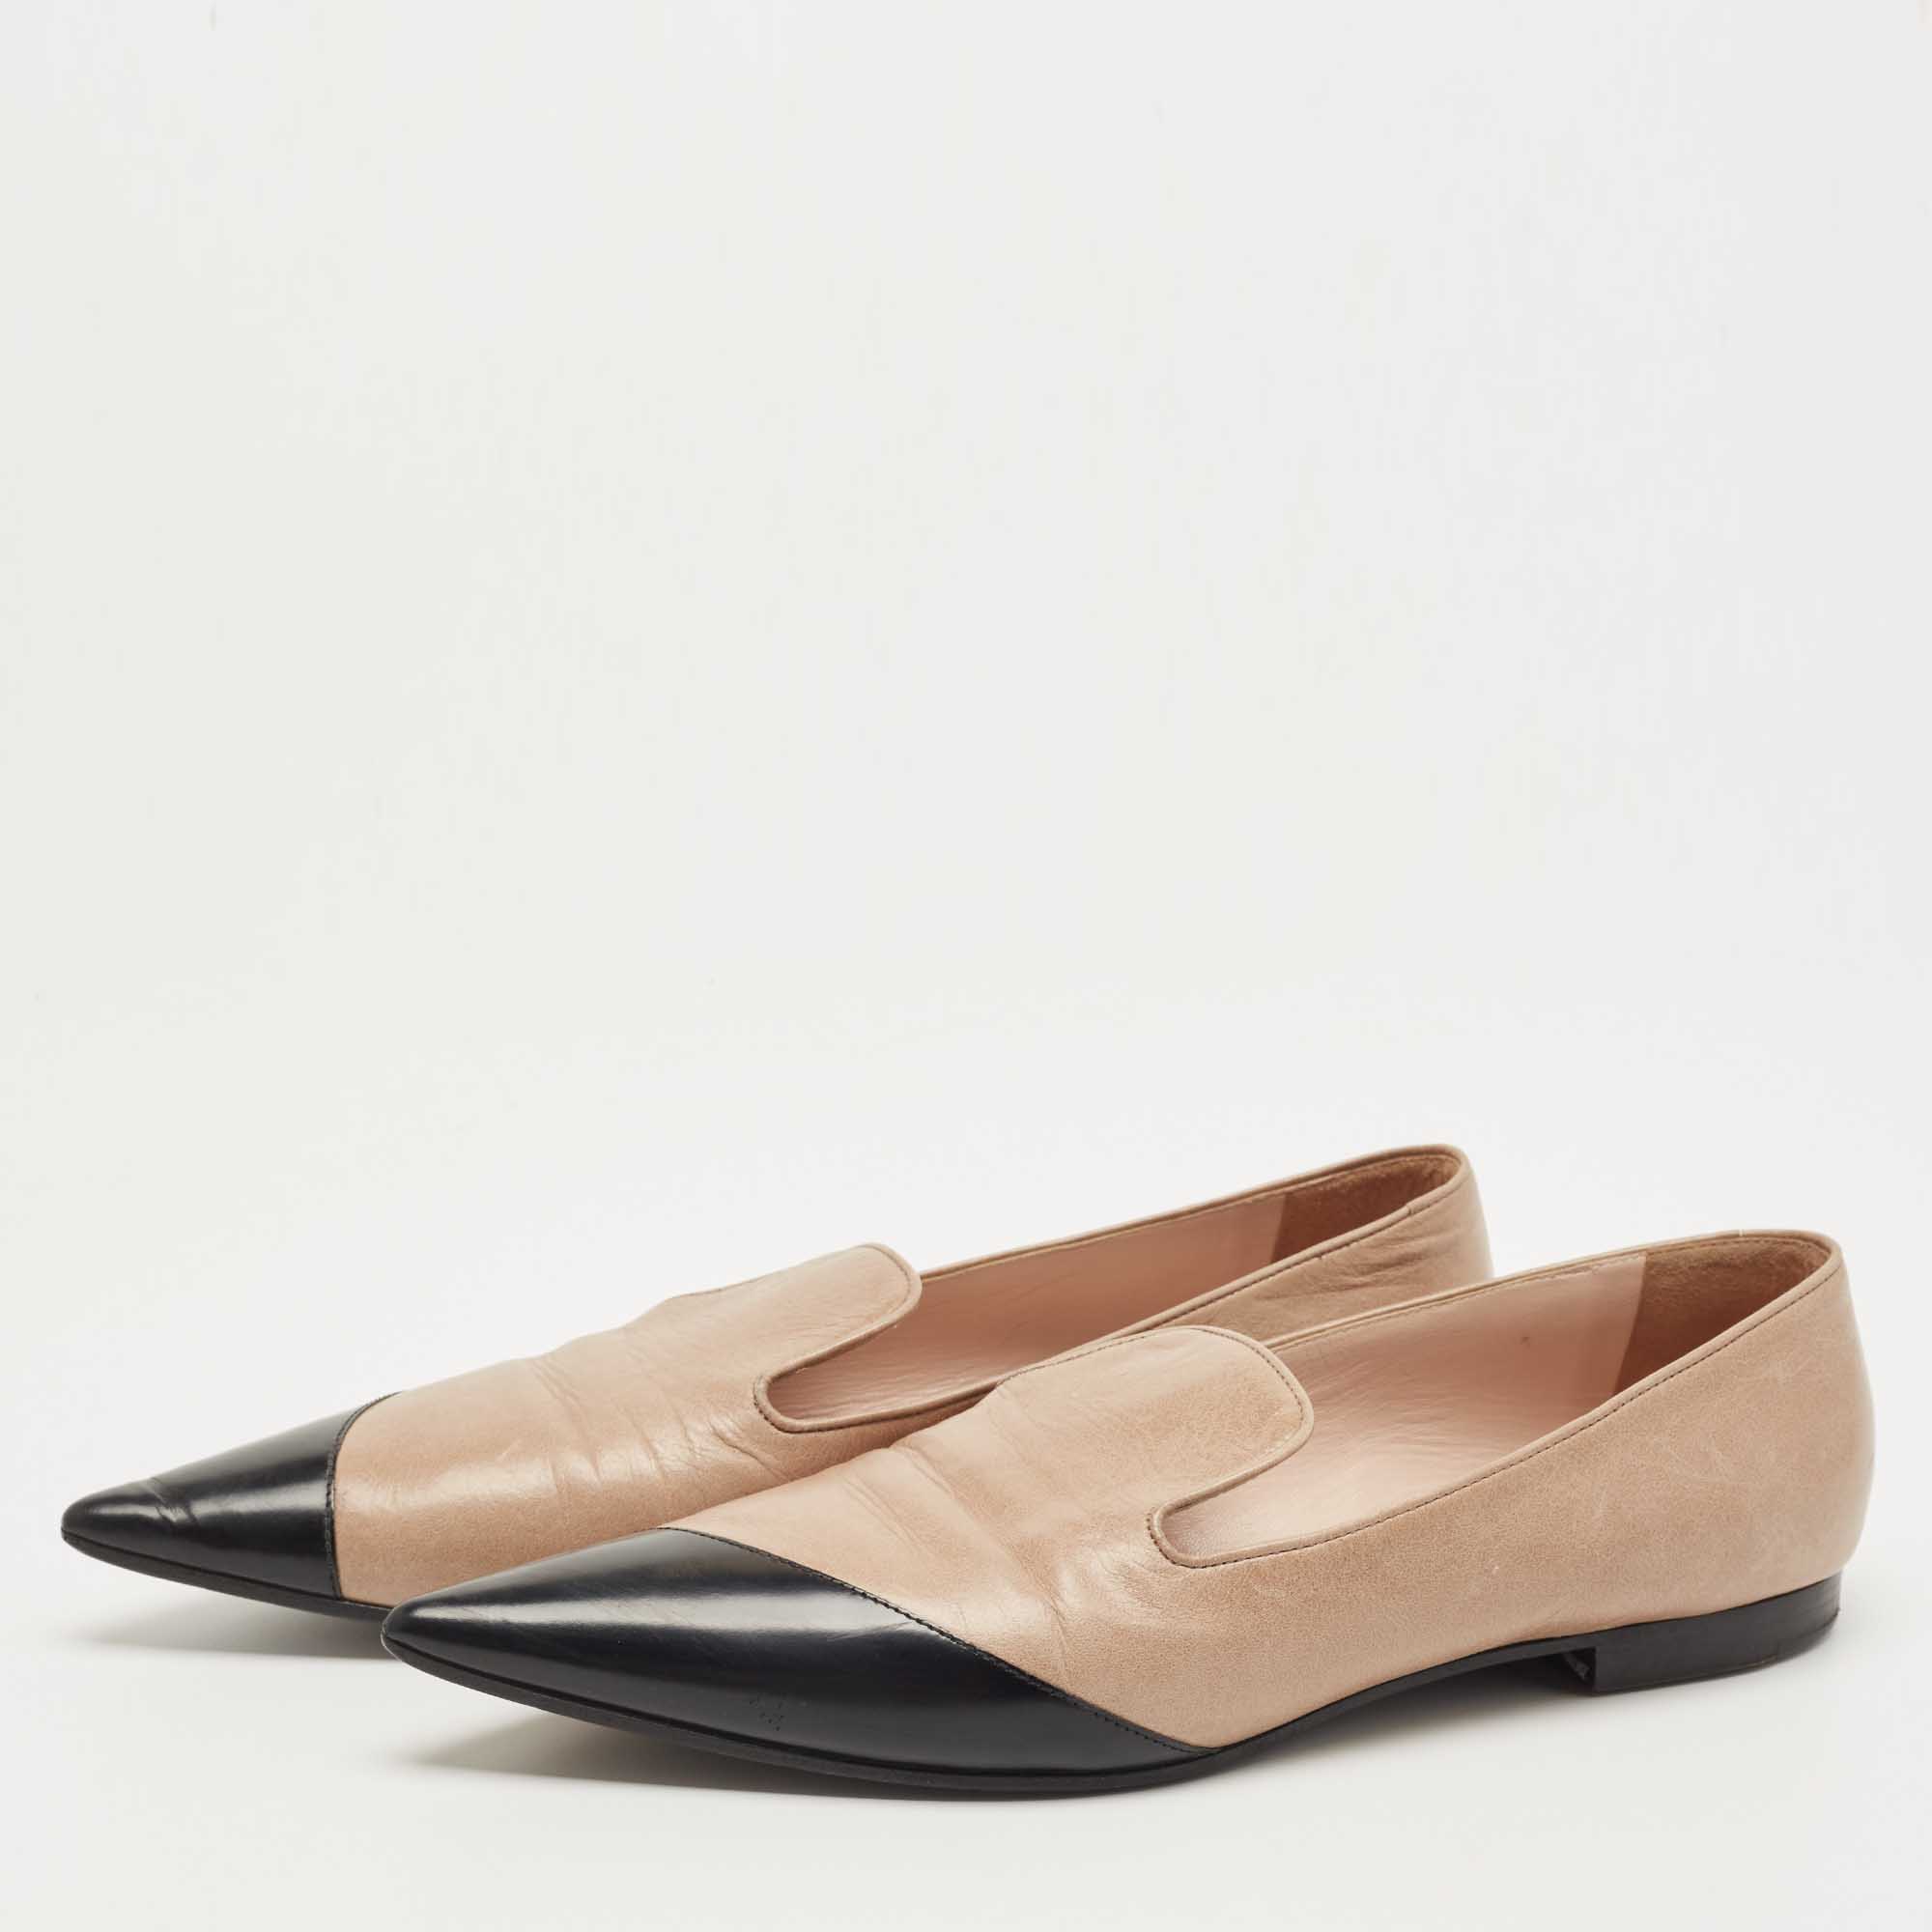 

Miu Miu Light Brown/Black Leather Pointed Toe Loafers Size